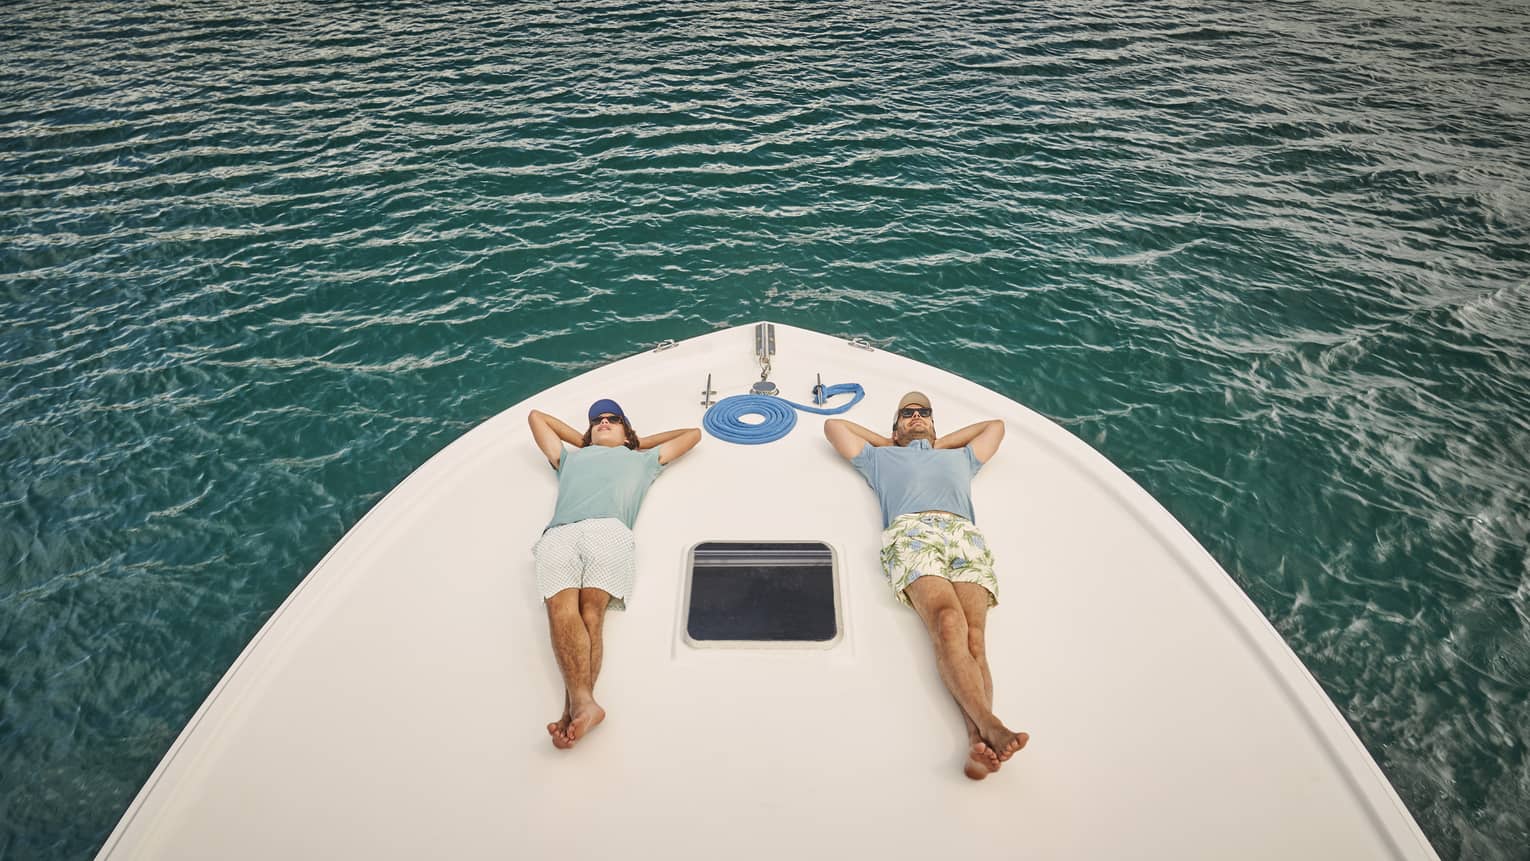 Resting on a boat’s bow over gently rippling water, two passengers lie on their backs, legs crossed, hands behind heads.